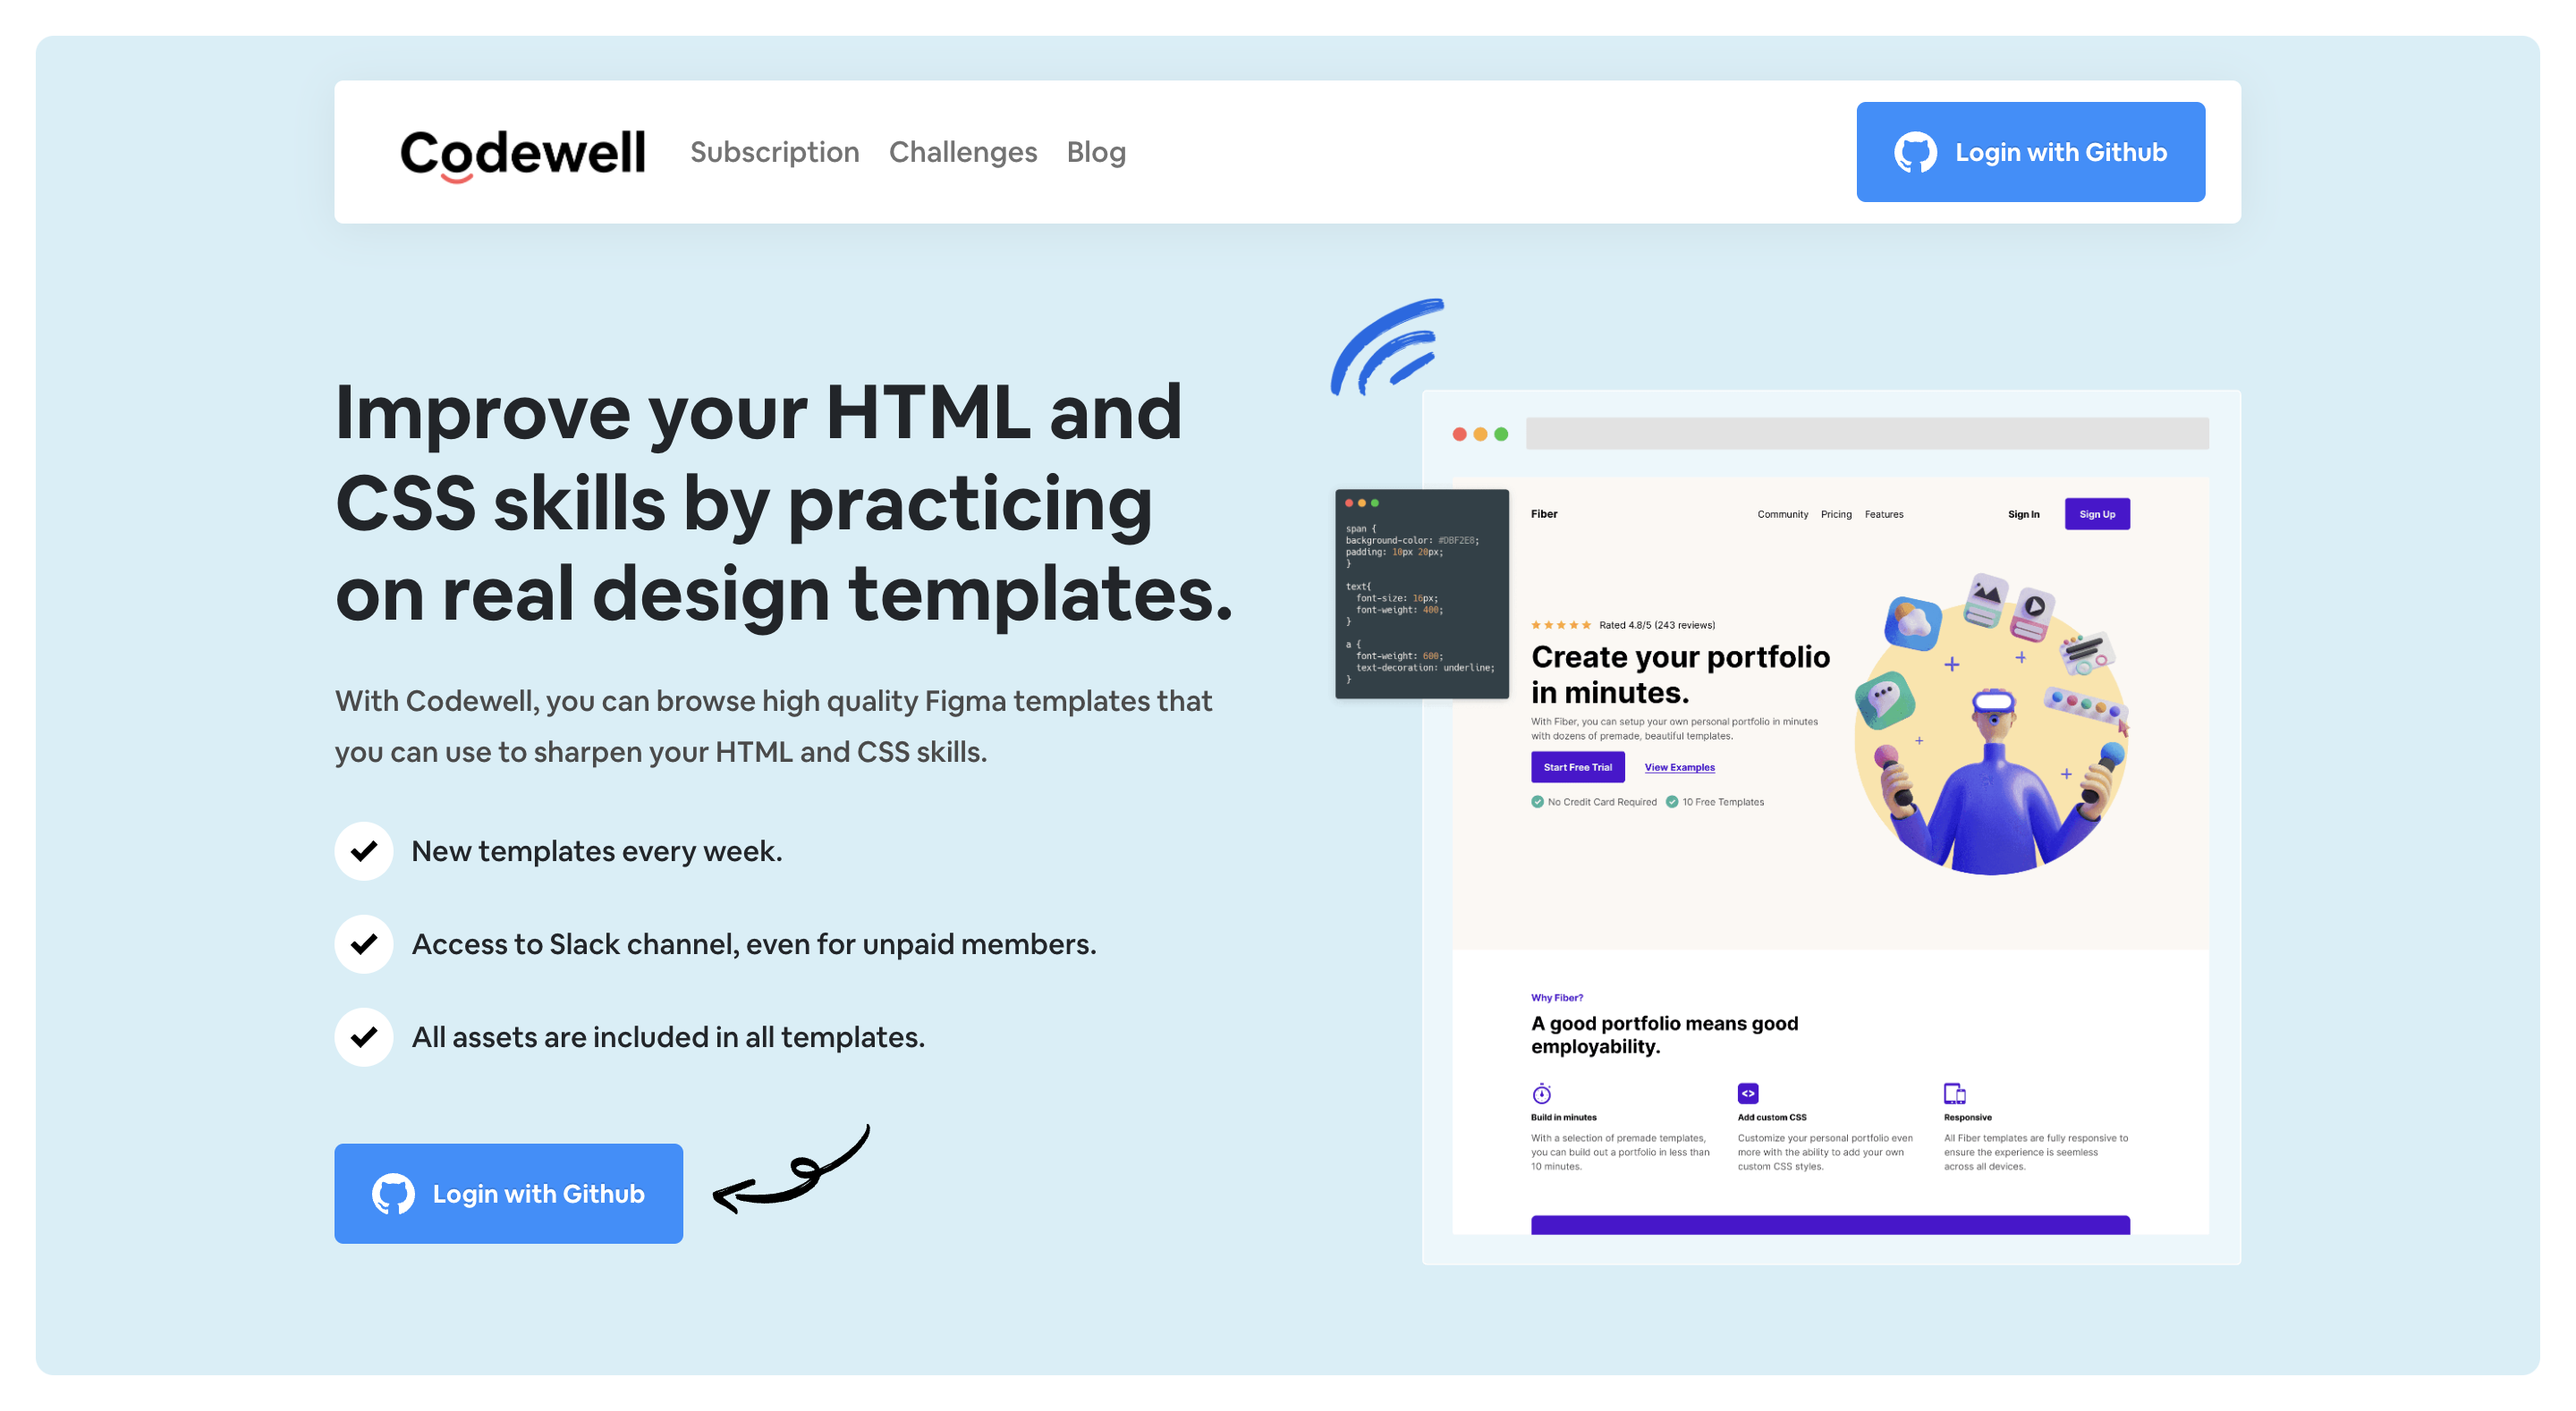 5 reasons why you should use Codewell for your next portfolio project